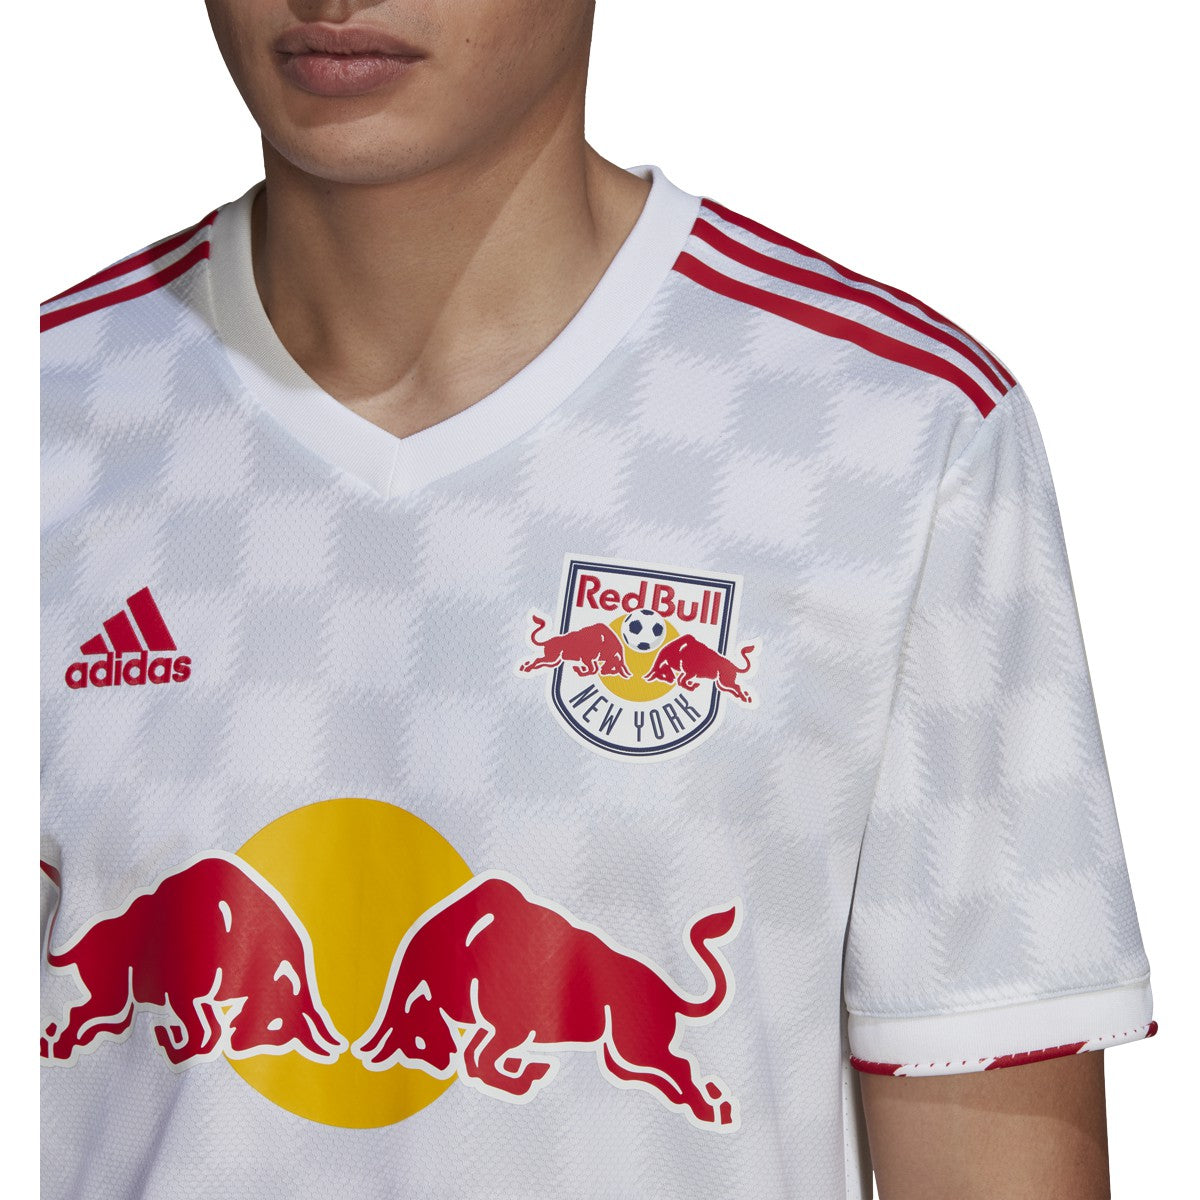  adidas Men's Soccer Red Bulls Home Jersey (X-Large